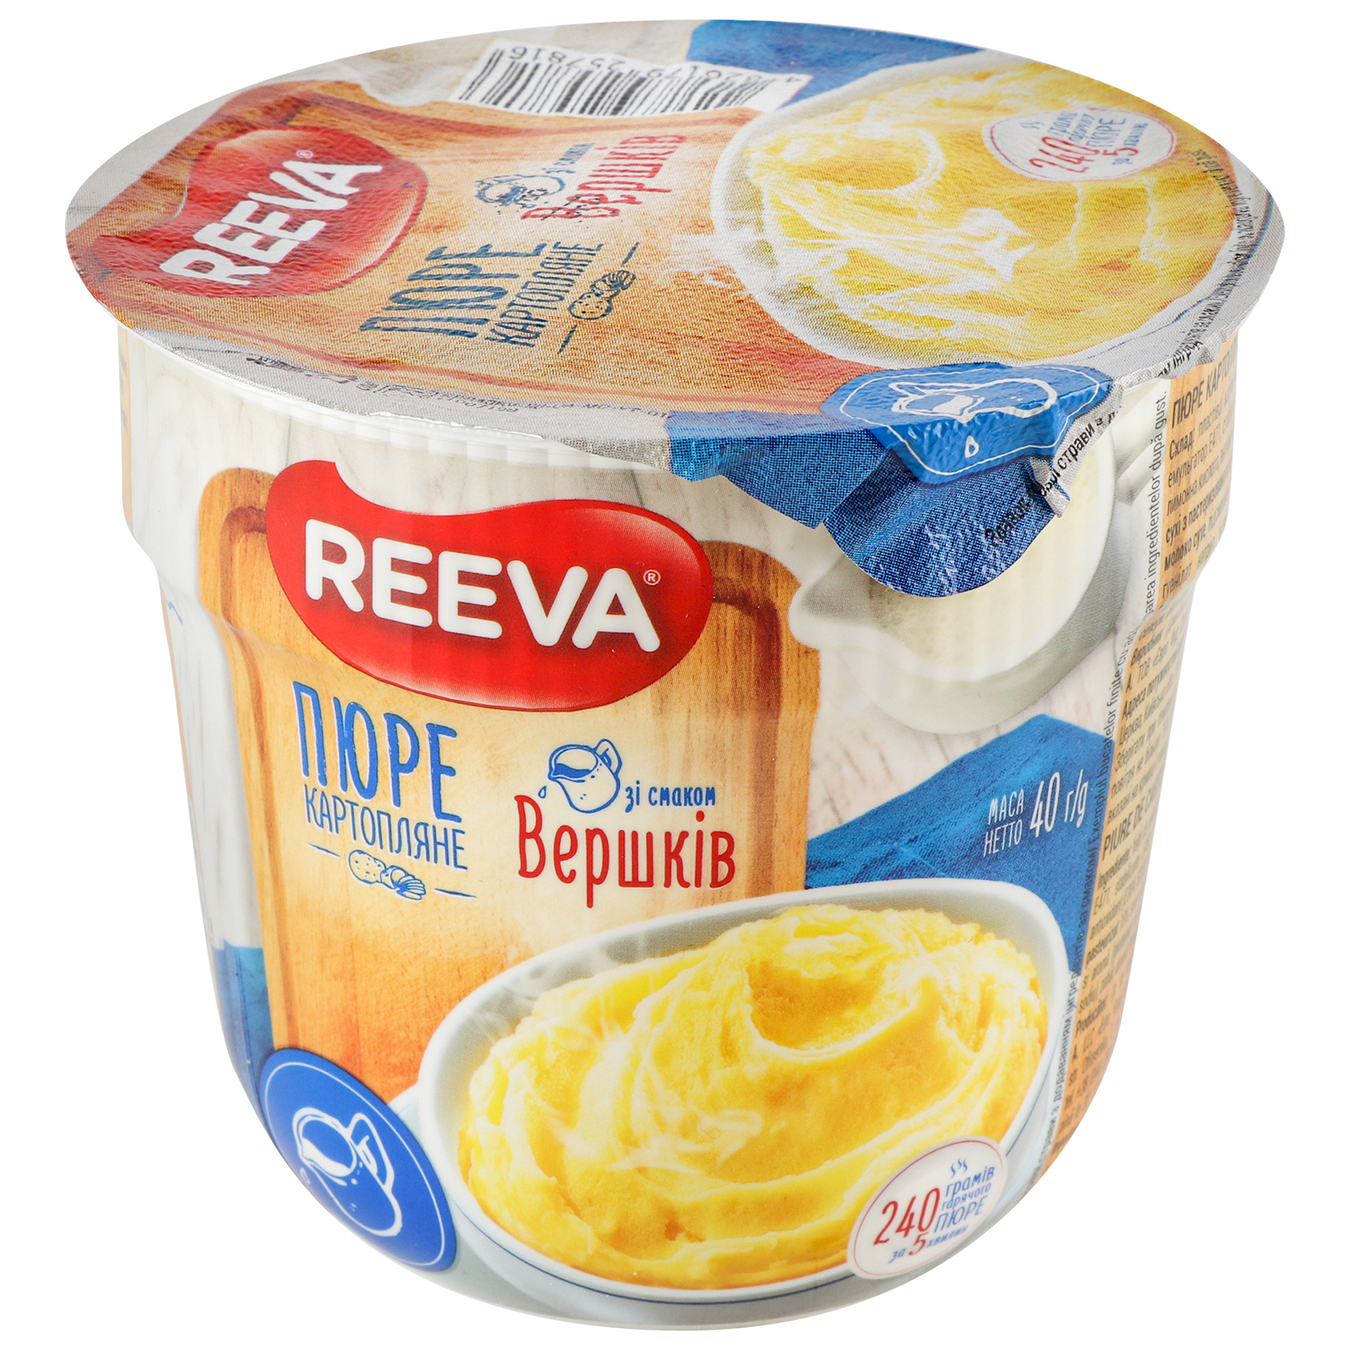 Reeva mashed potatoes with a taste of cream glass 40g 2